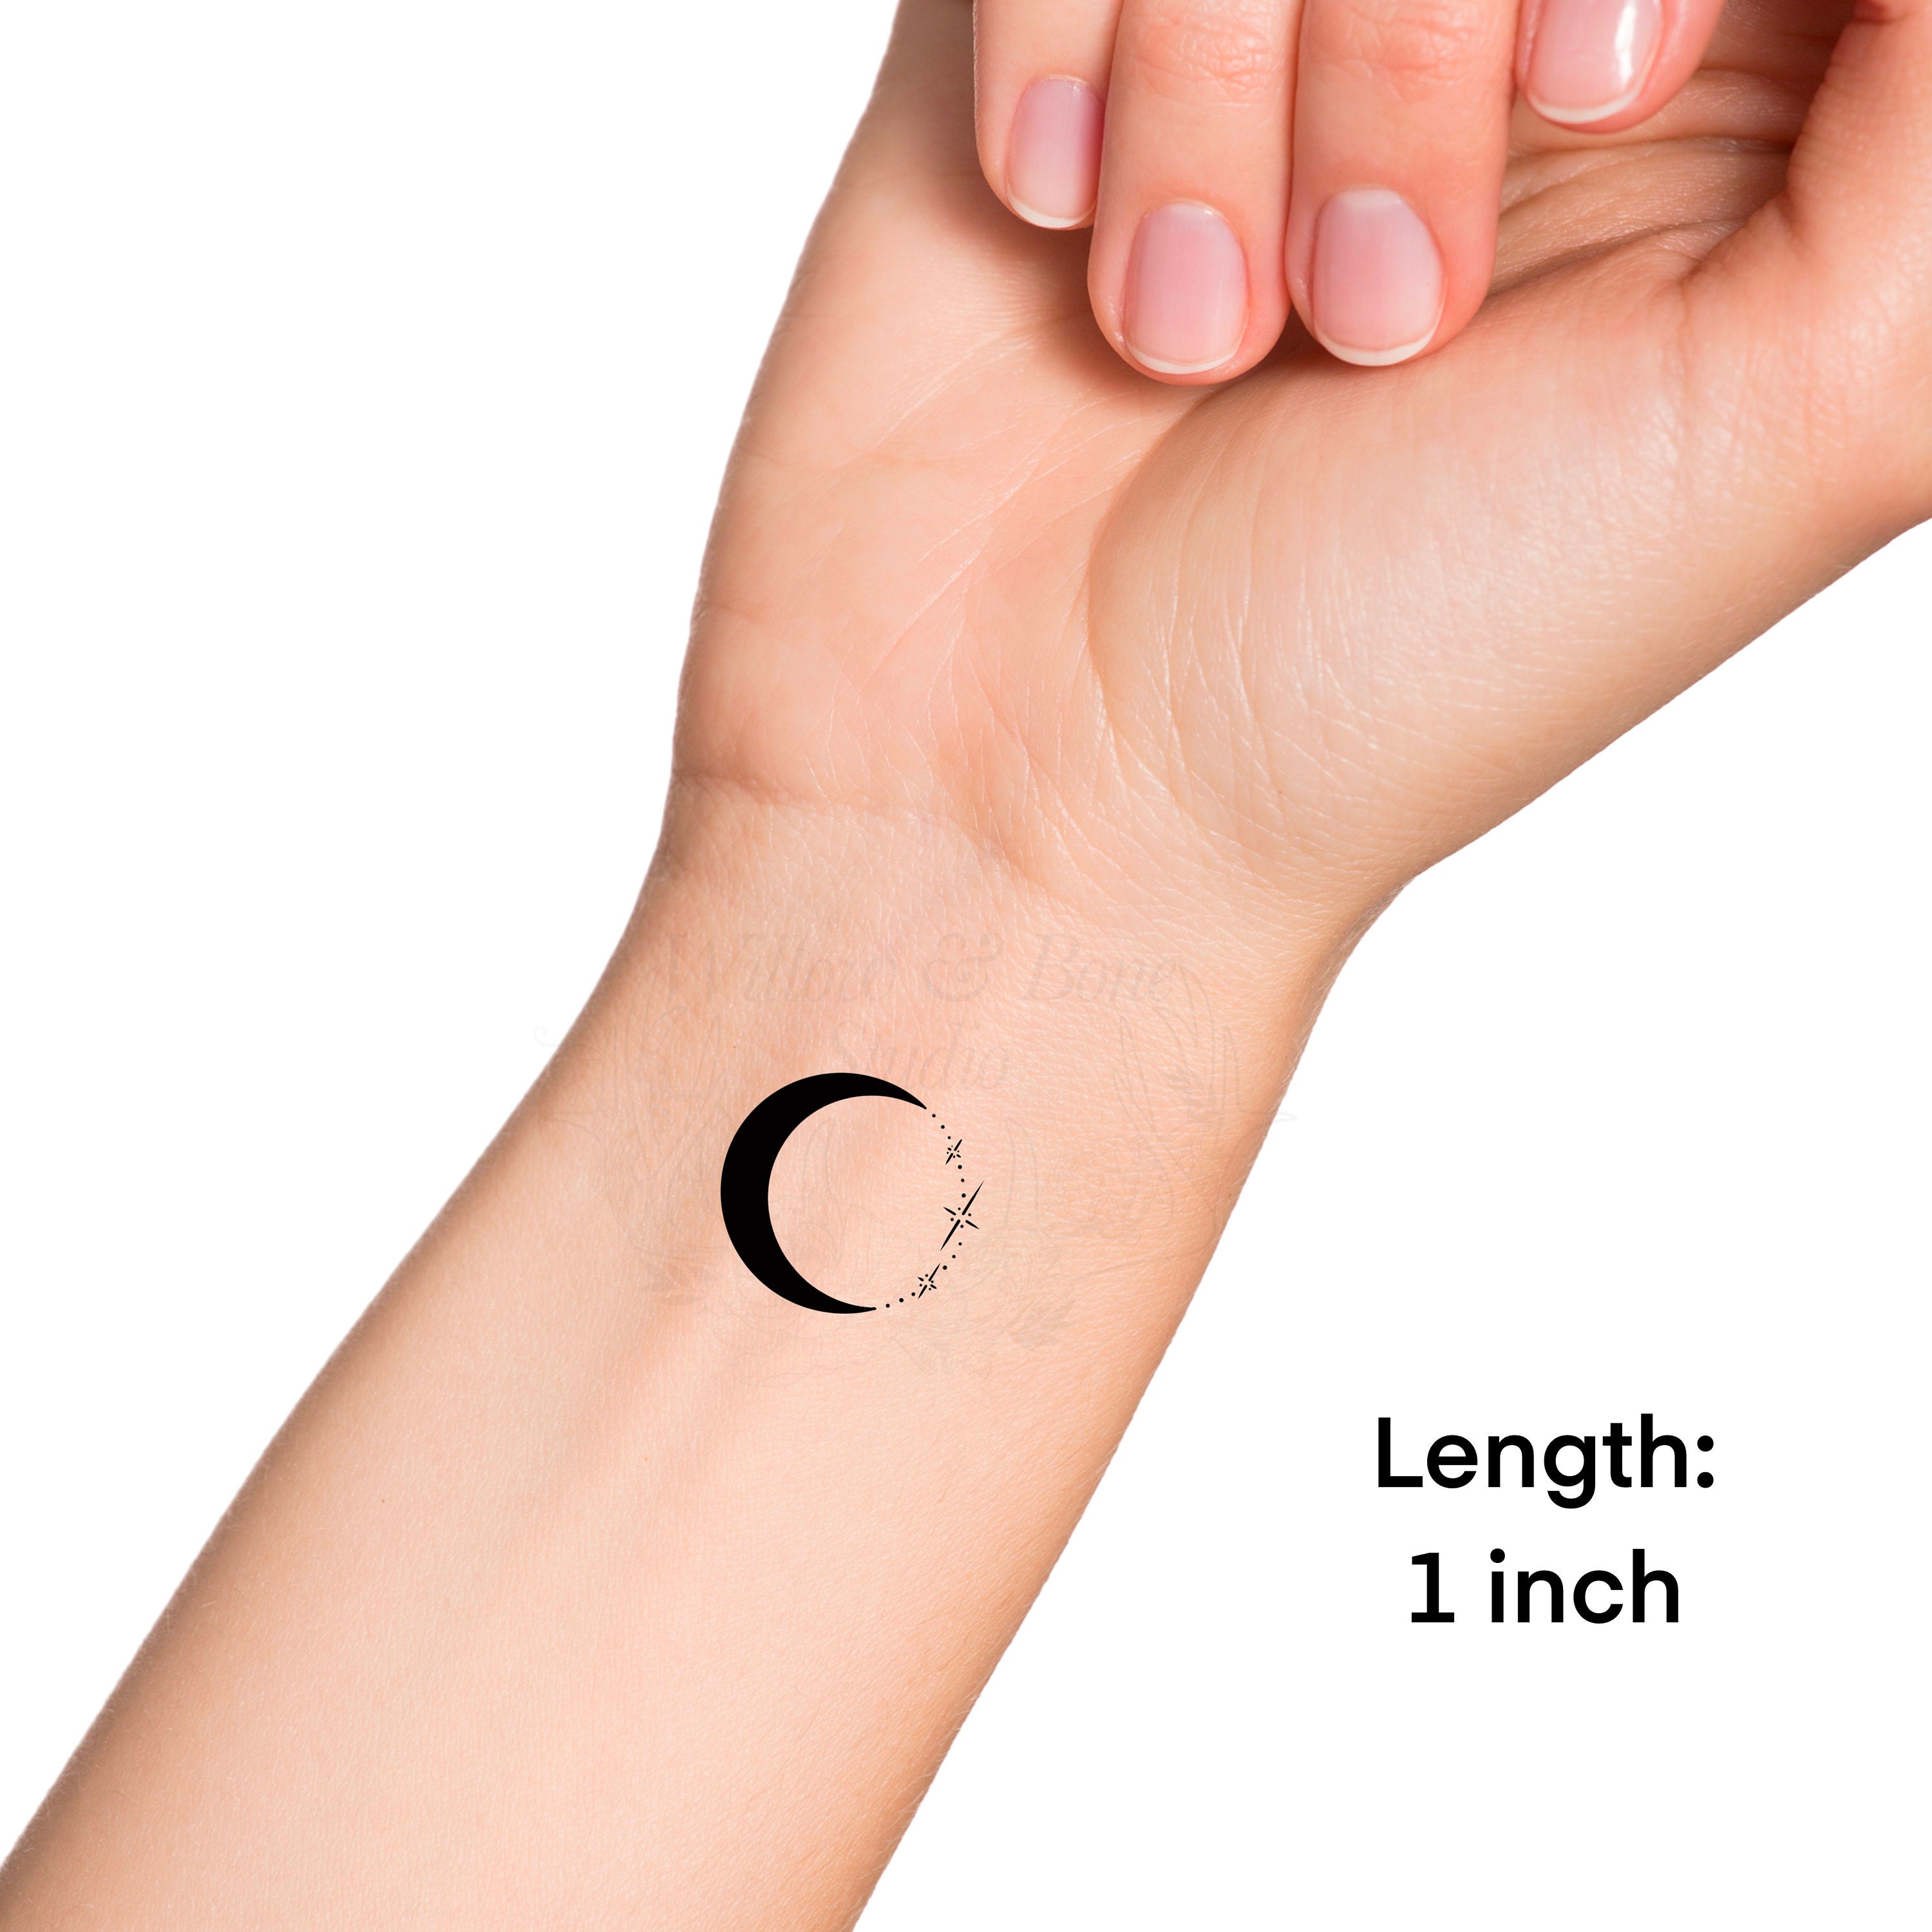 40 Adorable Moon Tattoo Designs And Ideas - Greenorc